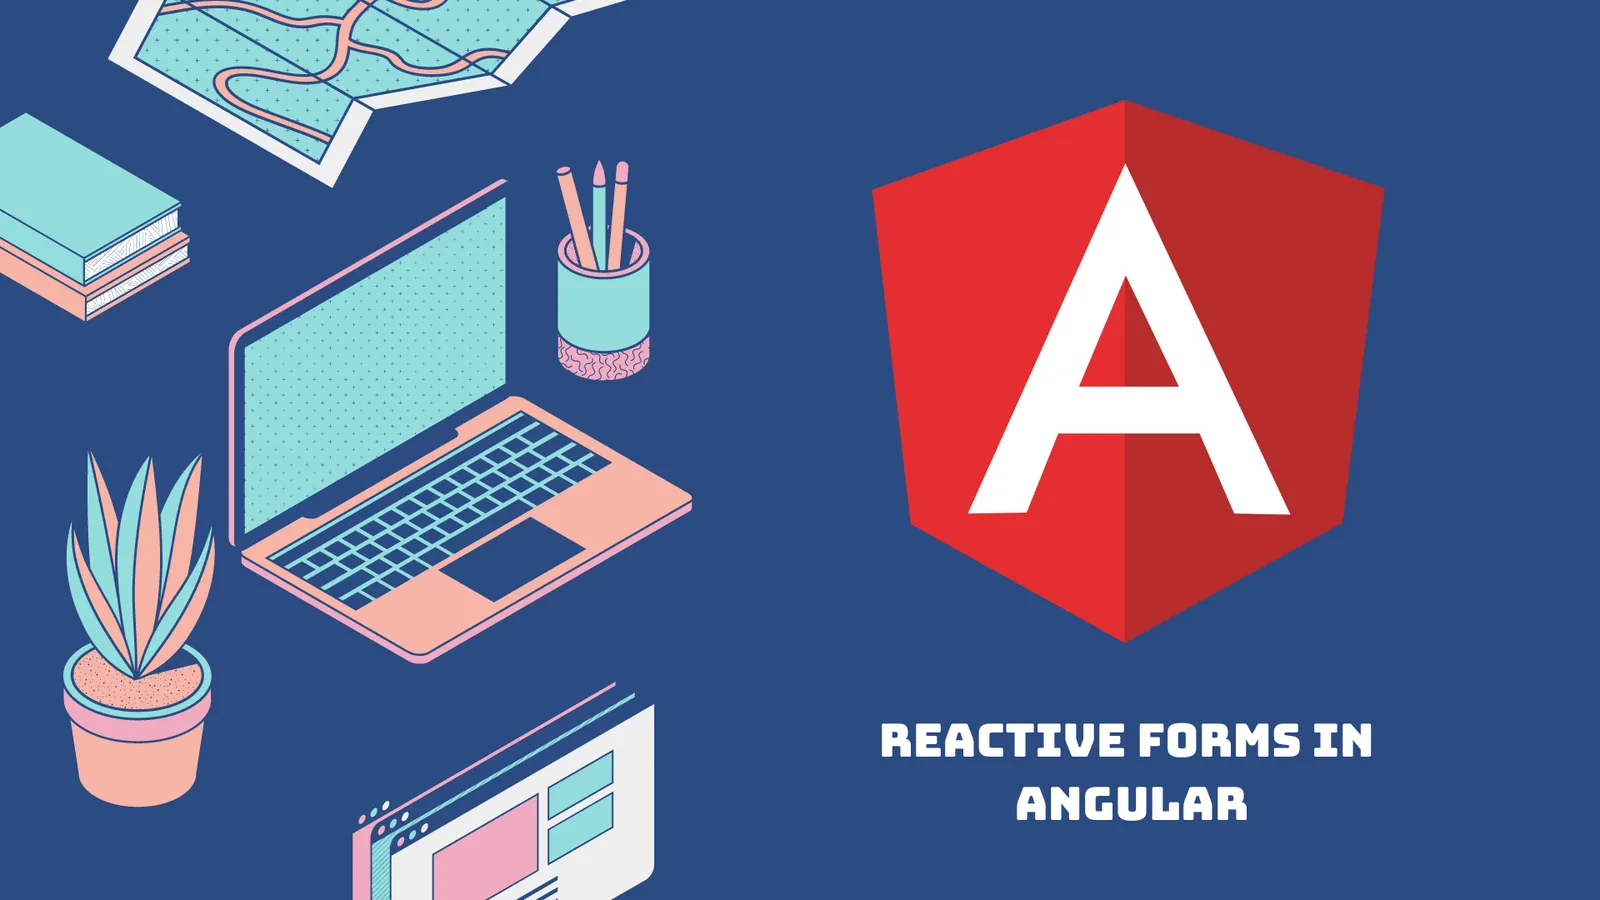 Angular Reactive Forms: How to Use Reactive Forms in Angular